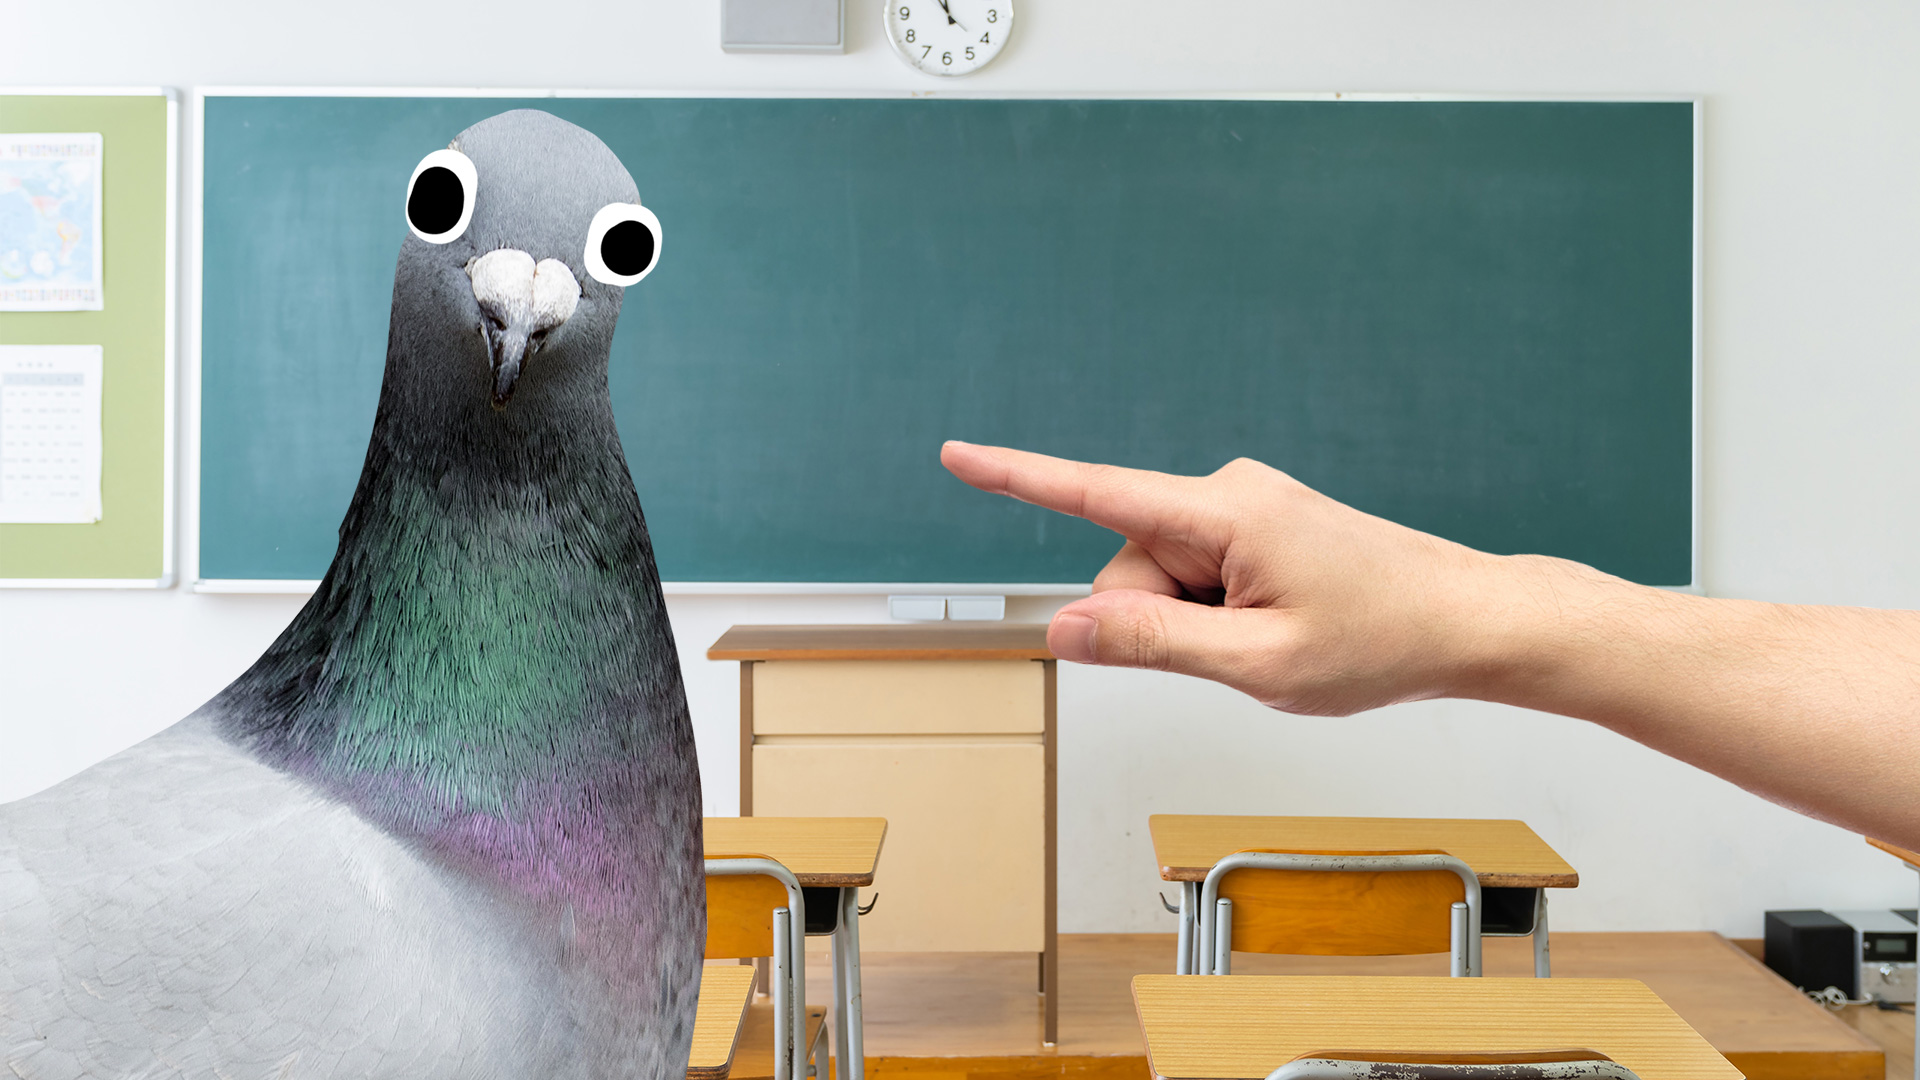 A pigeon in a classroom